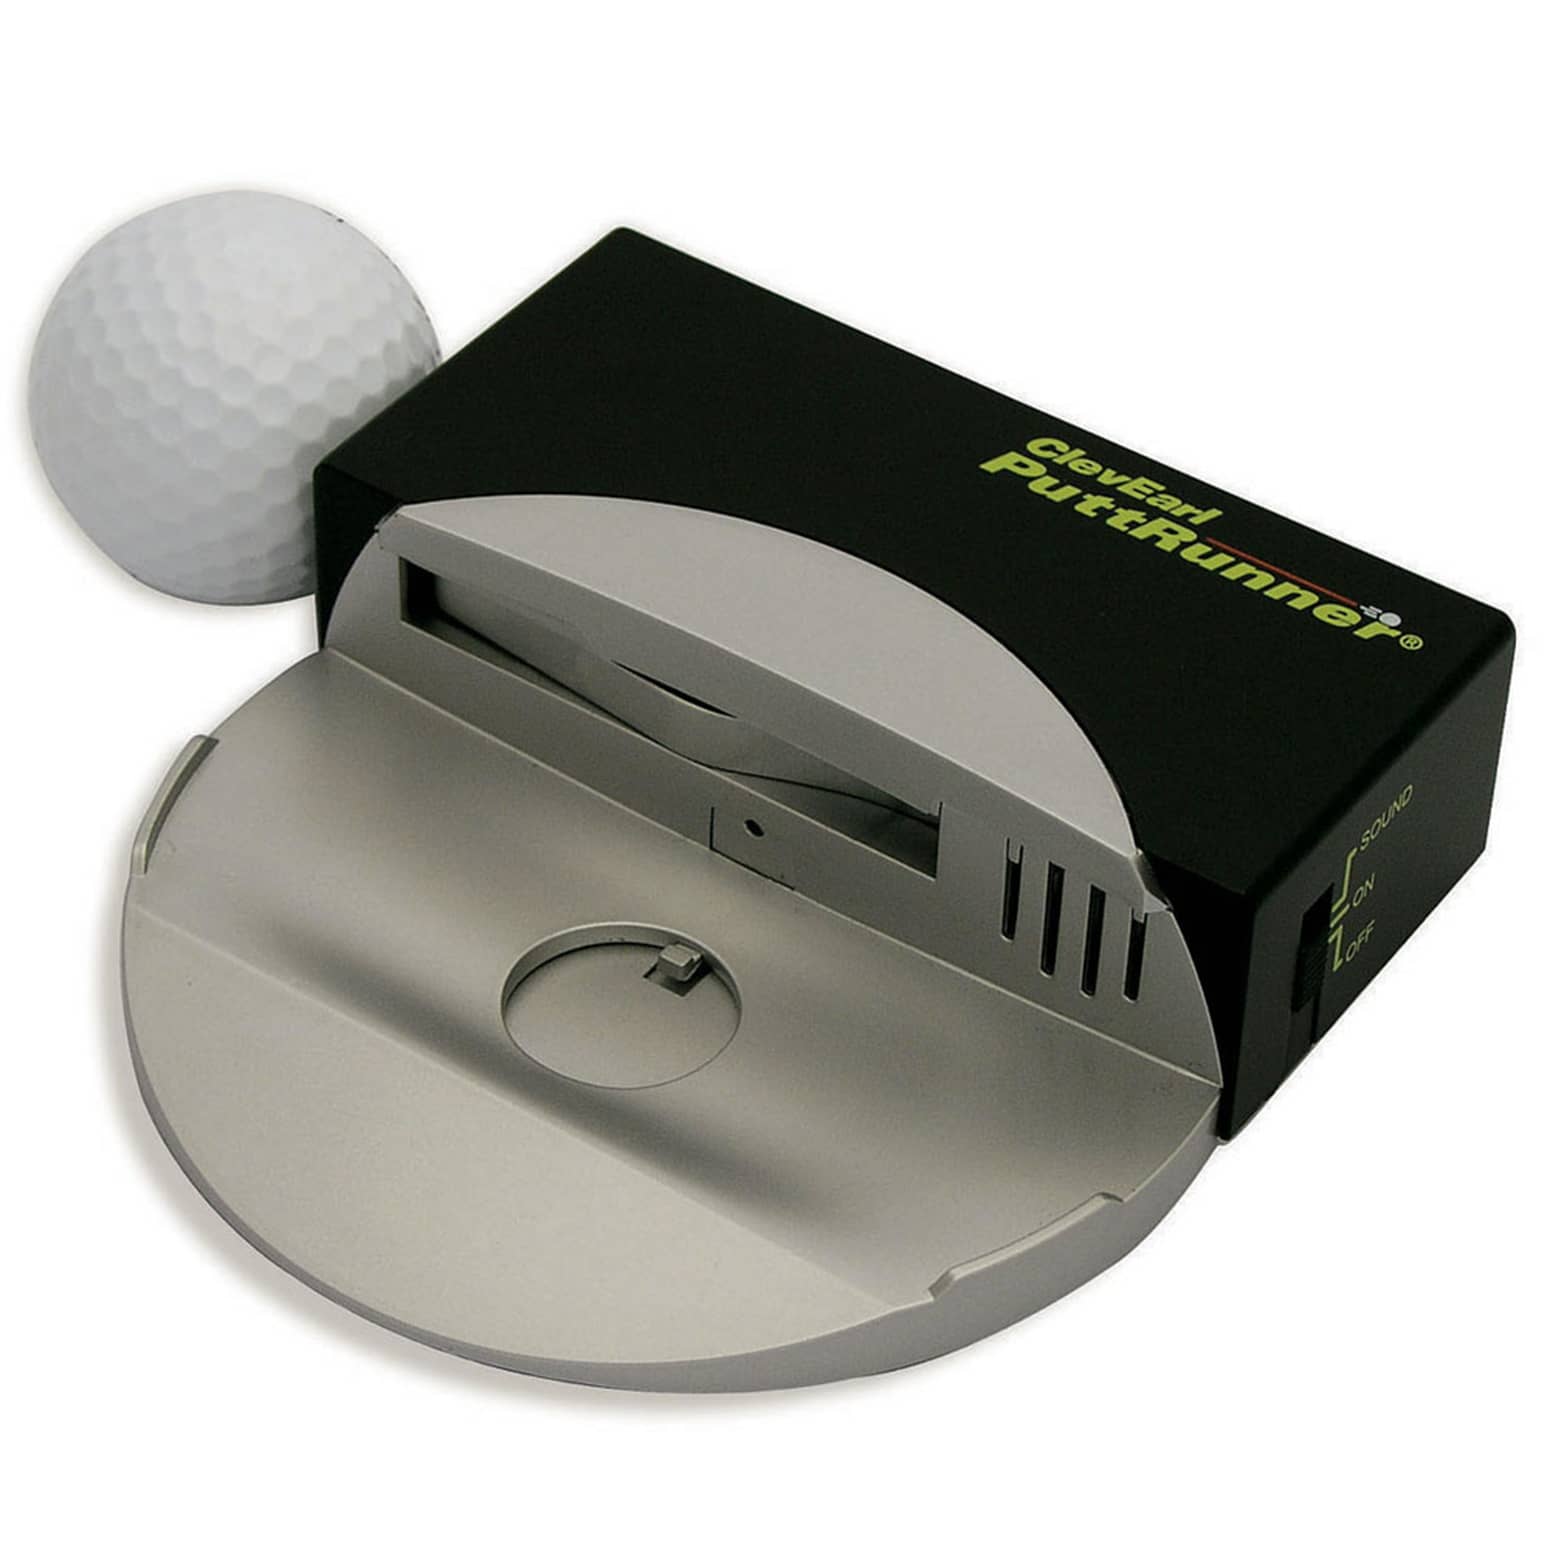 ClevEarl PuttRunner - World's Smallest Automatic Putt-Return System!